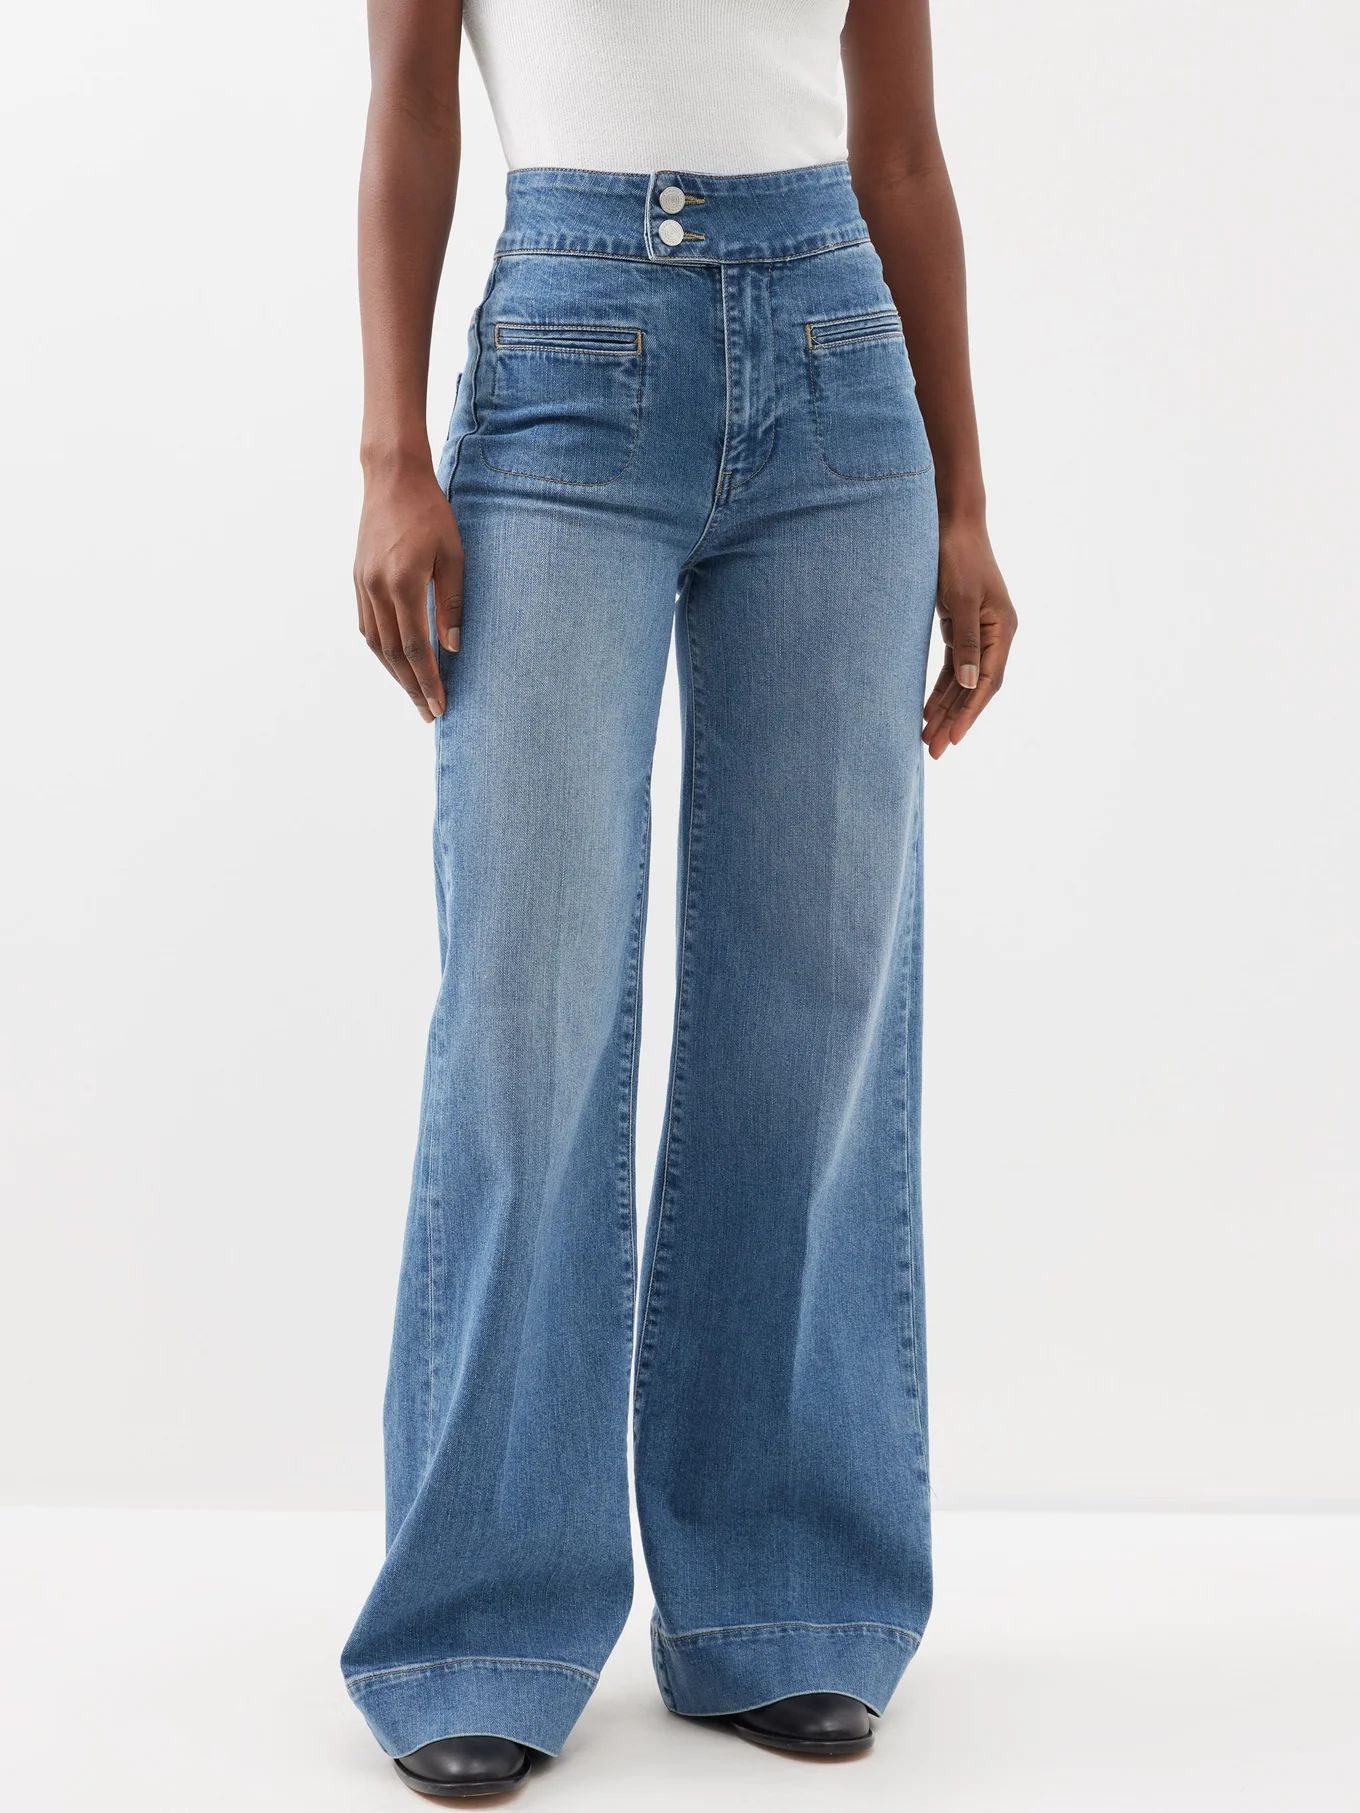 Le Hardy wide-leg jeans | FRAME | Matches (US)